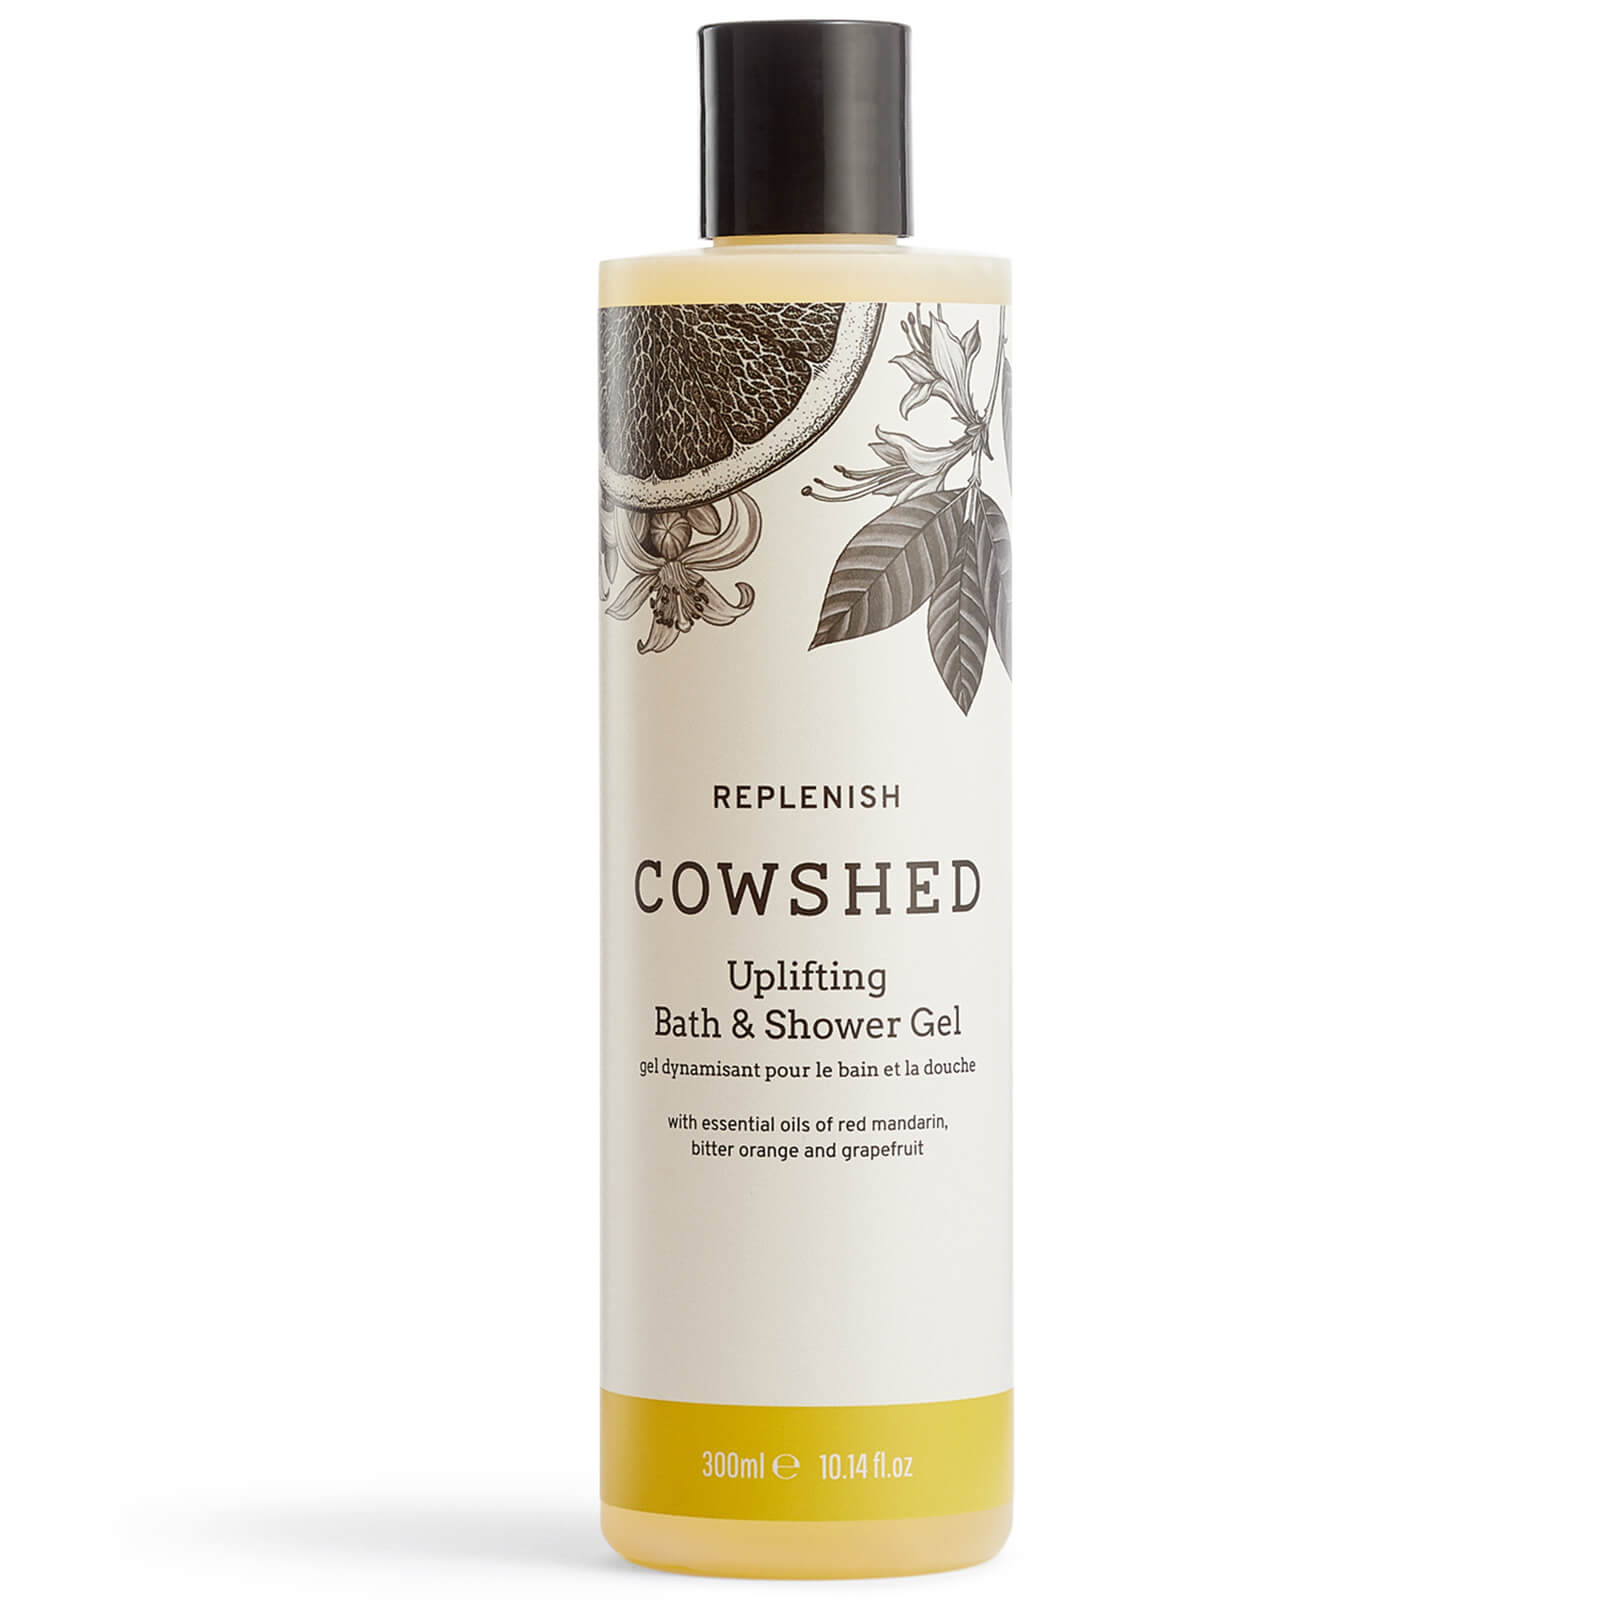 Image of Cowshed REPLENISH Uplifting Bath and Shower Gel 300ml